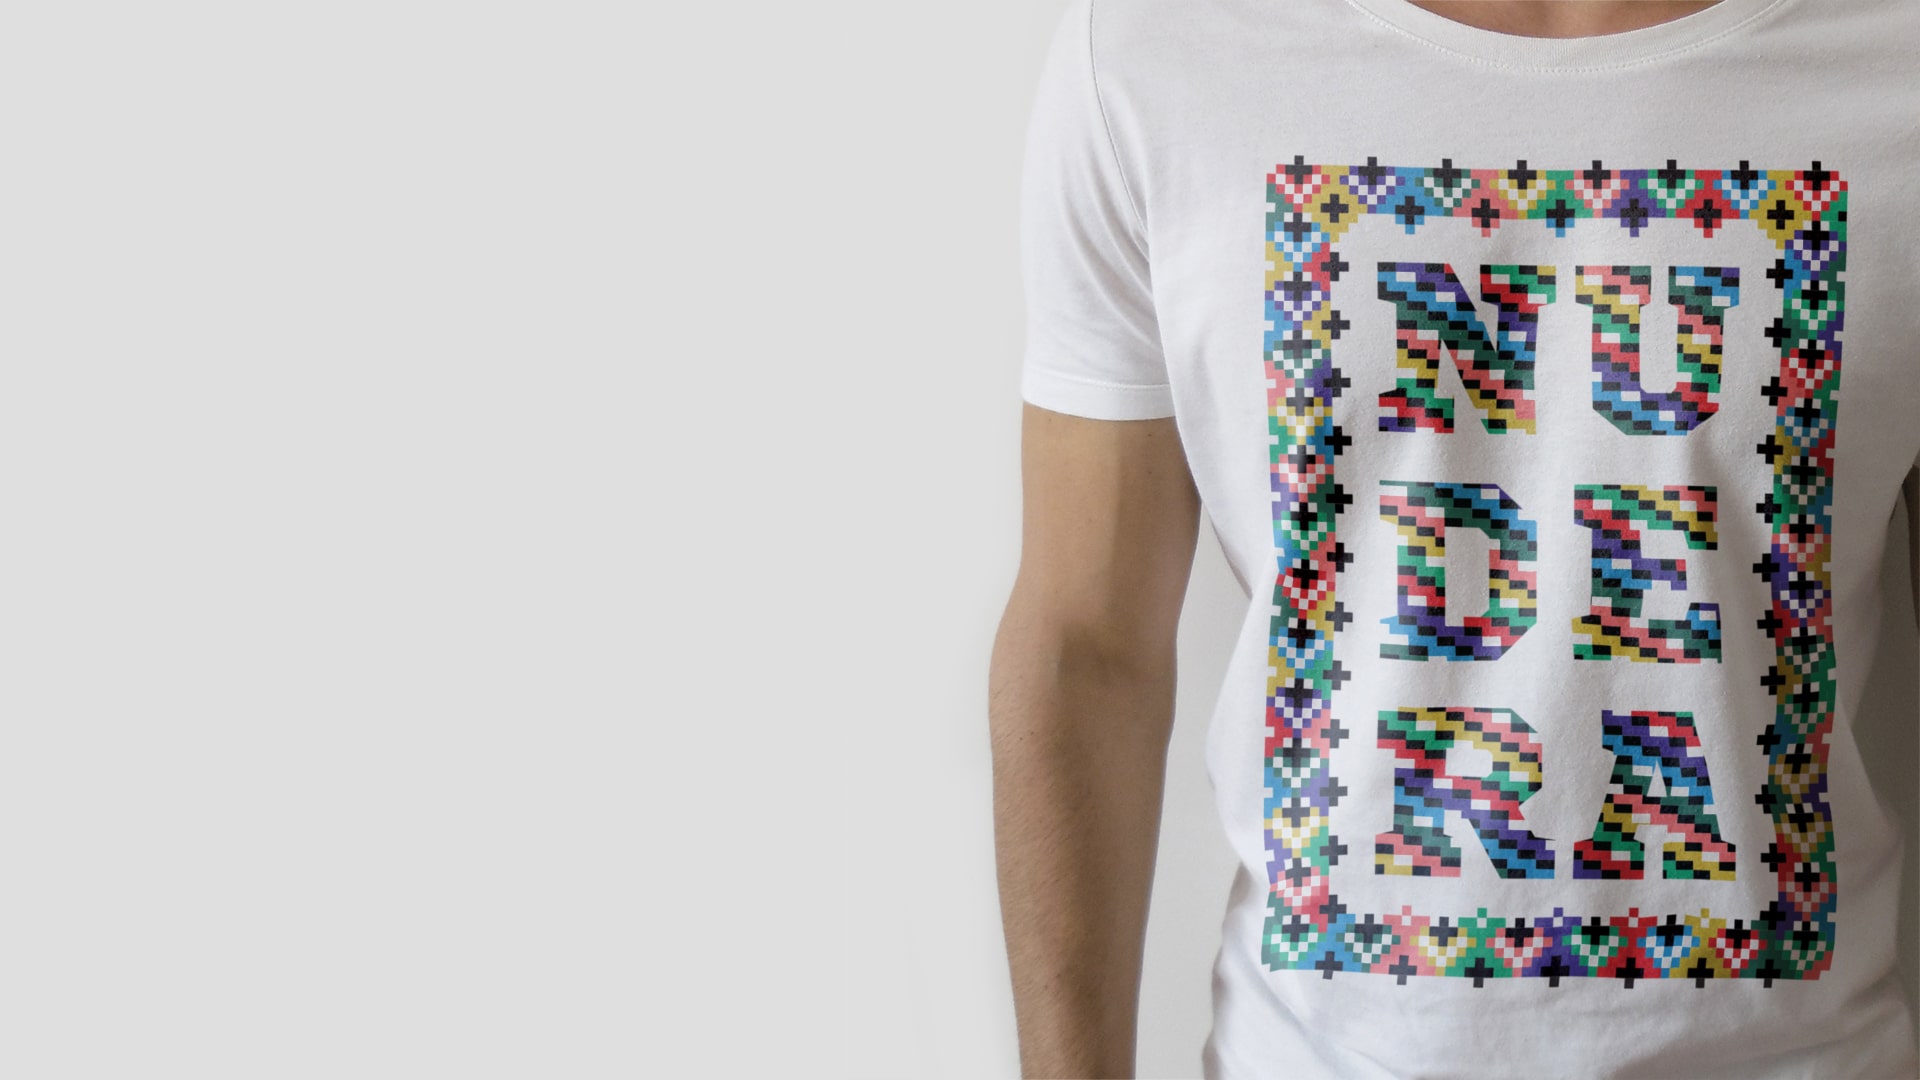 Nudera-T-shirt-by-Emtisquare-and-Miro-Tomic